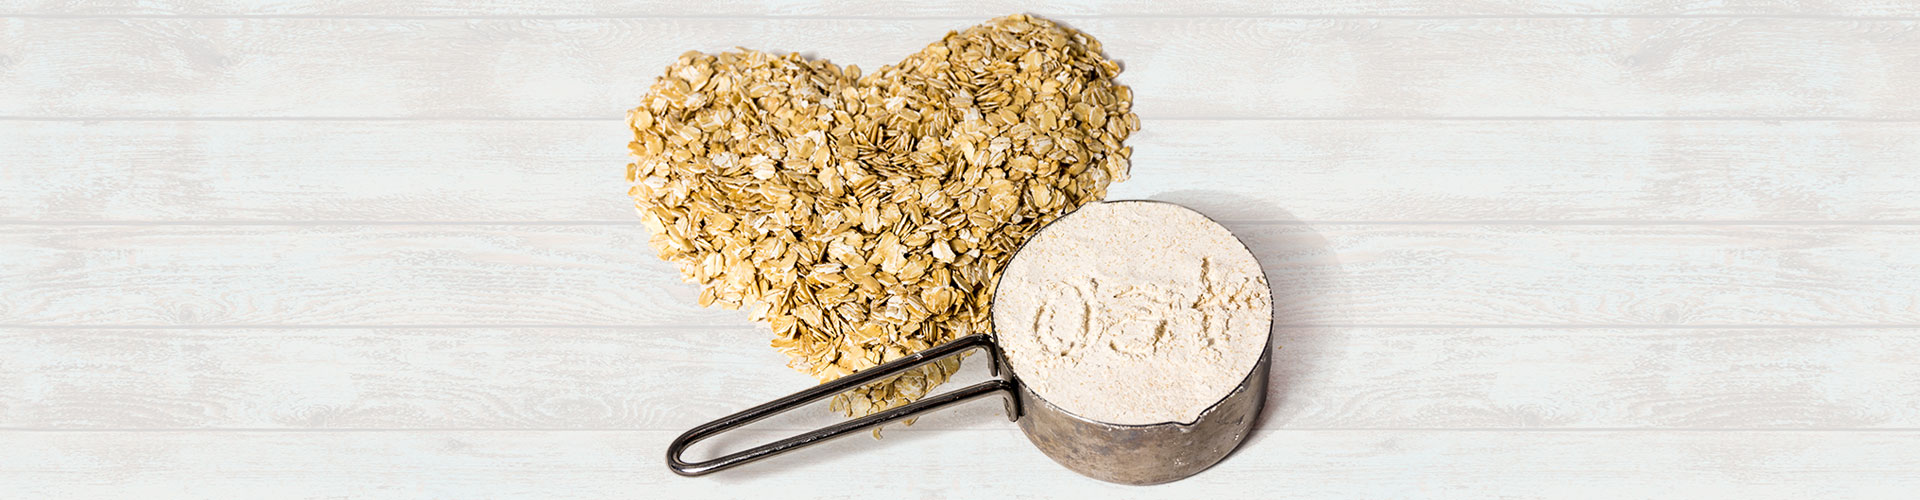 Oats can be a big part of a healthy diet